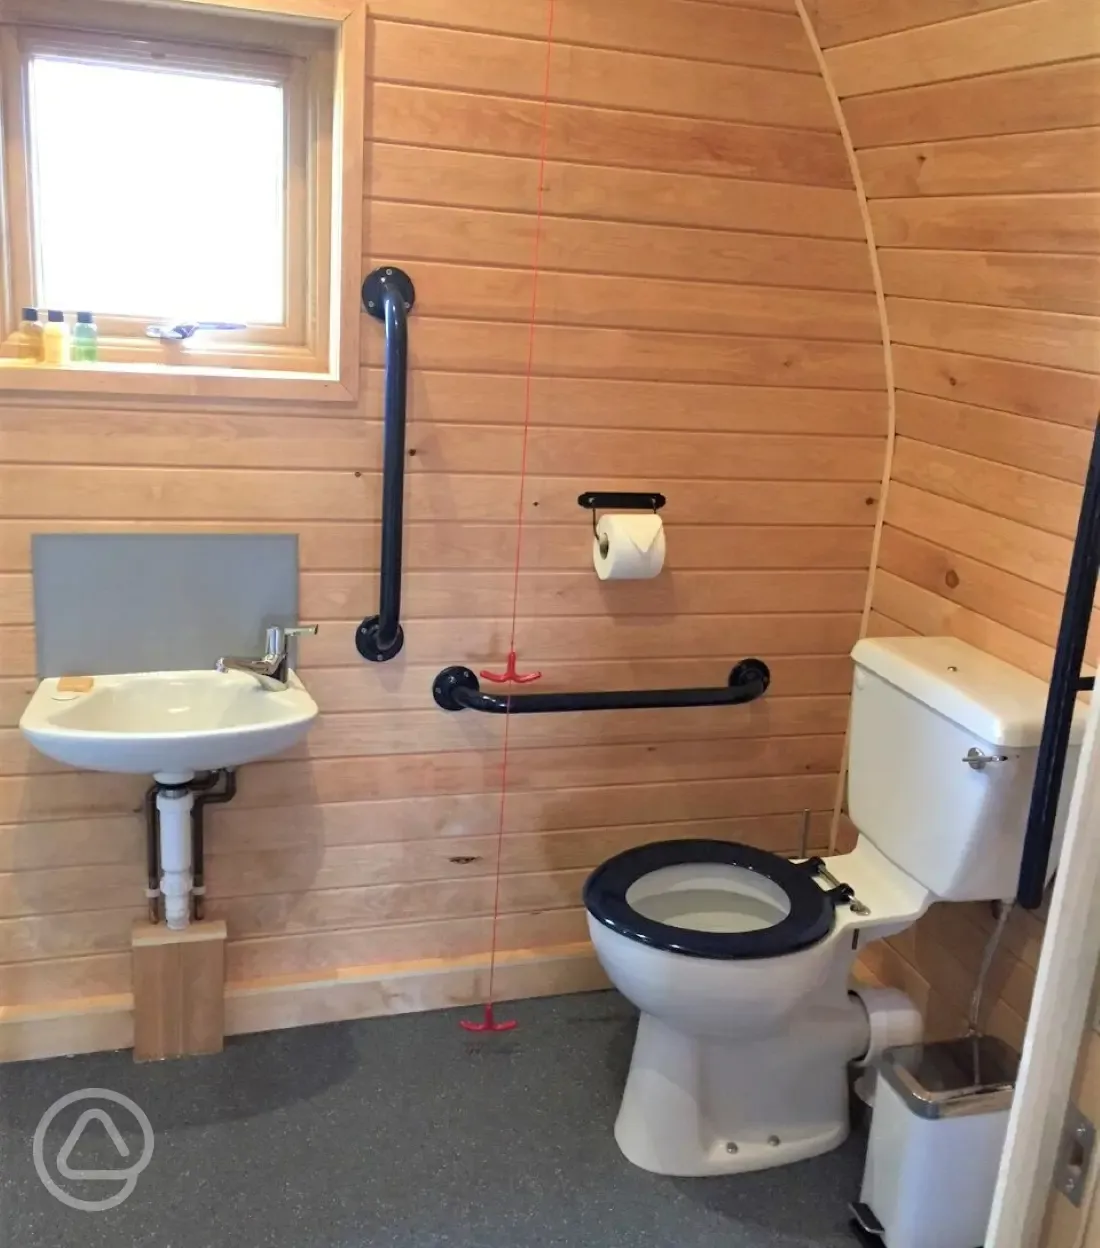 Disabled toilet facility